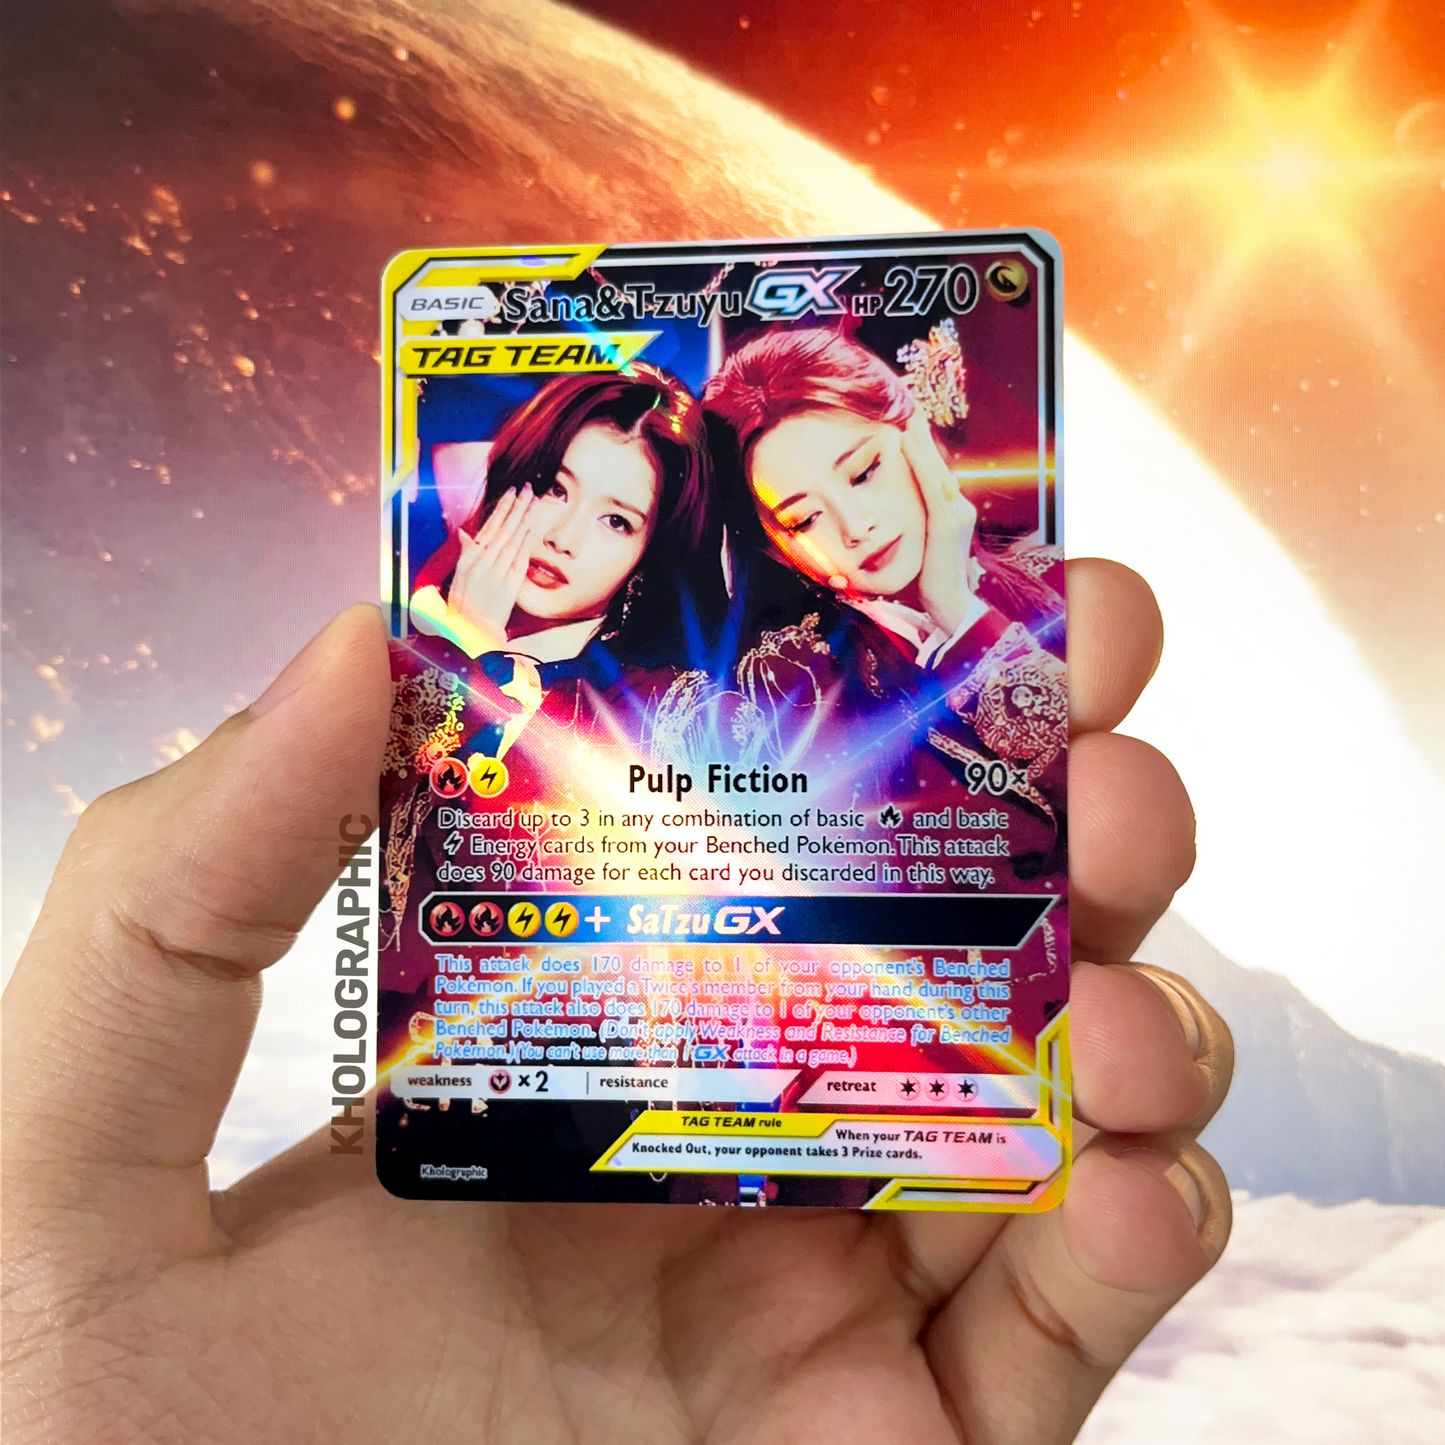 Twice TagTeam Holographic Cards (Michanyeonzudamosa ver.)